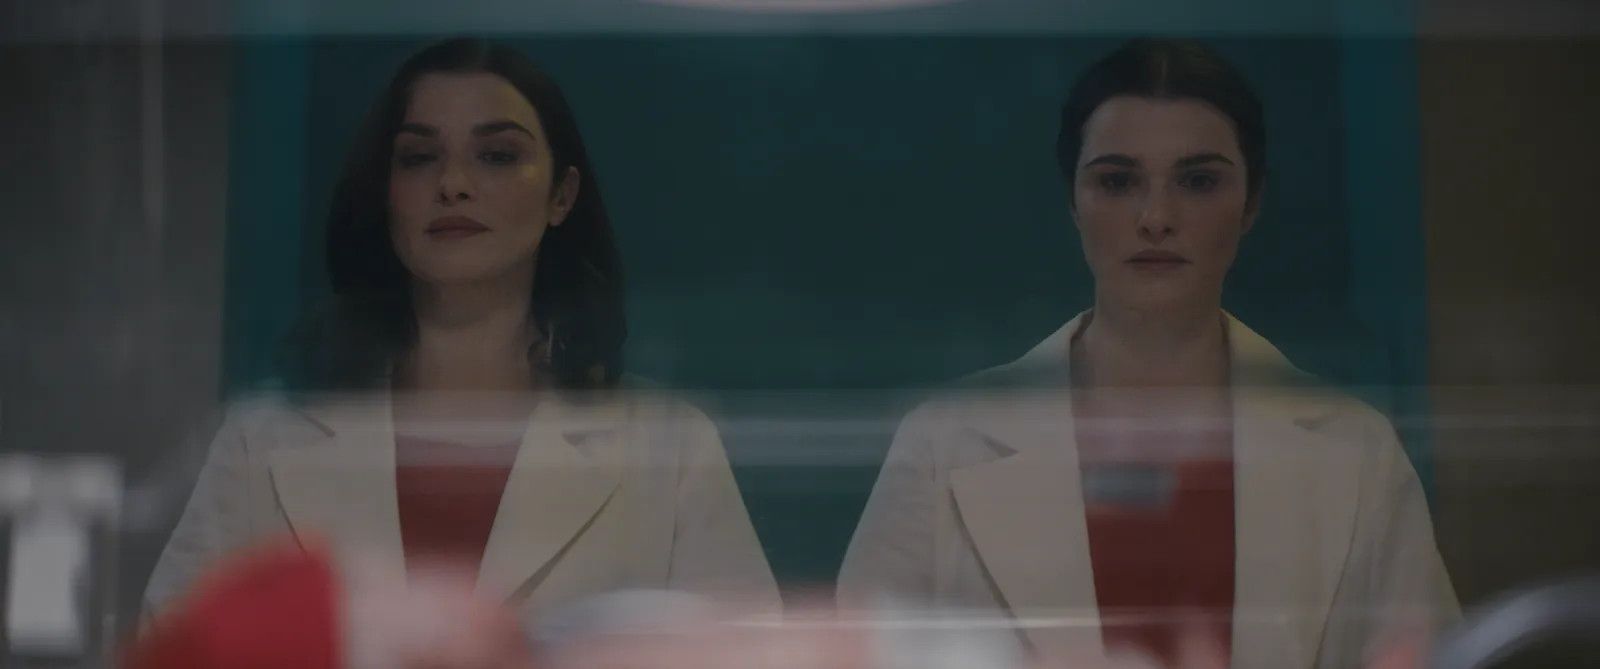 Rachel Weisz as twins doctors in Dead Ringers, looking identical except one has her hair hanging long and the other has it up